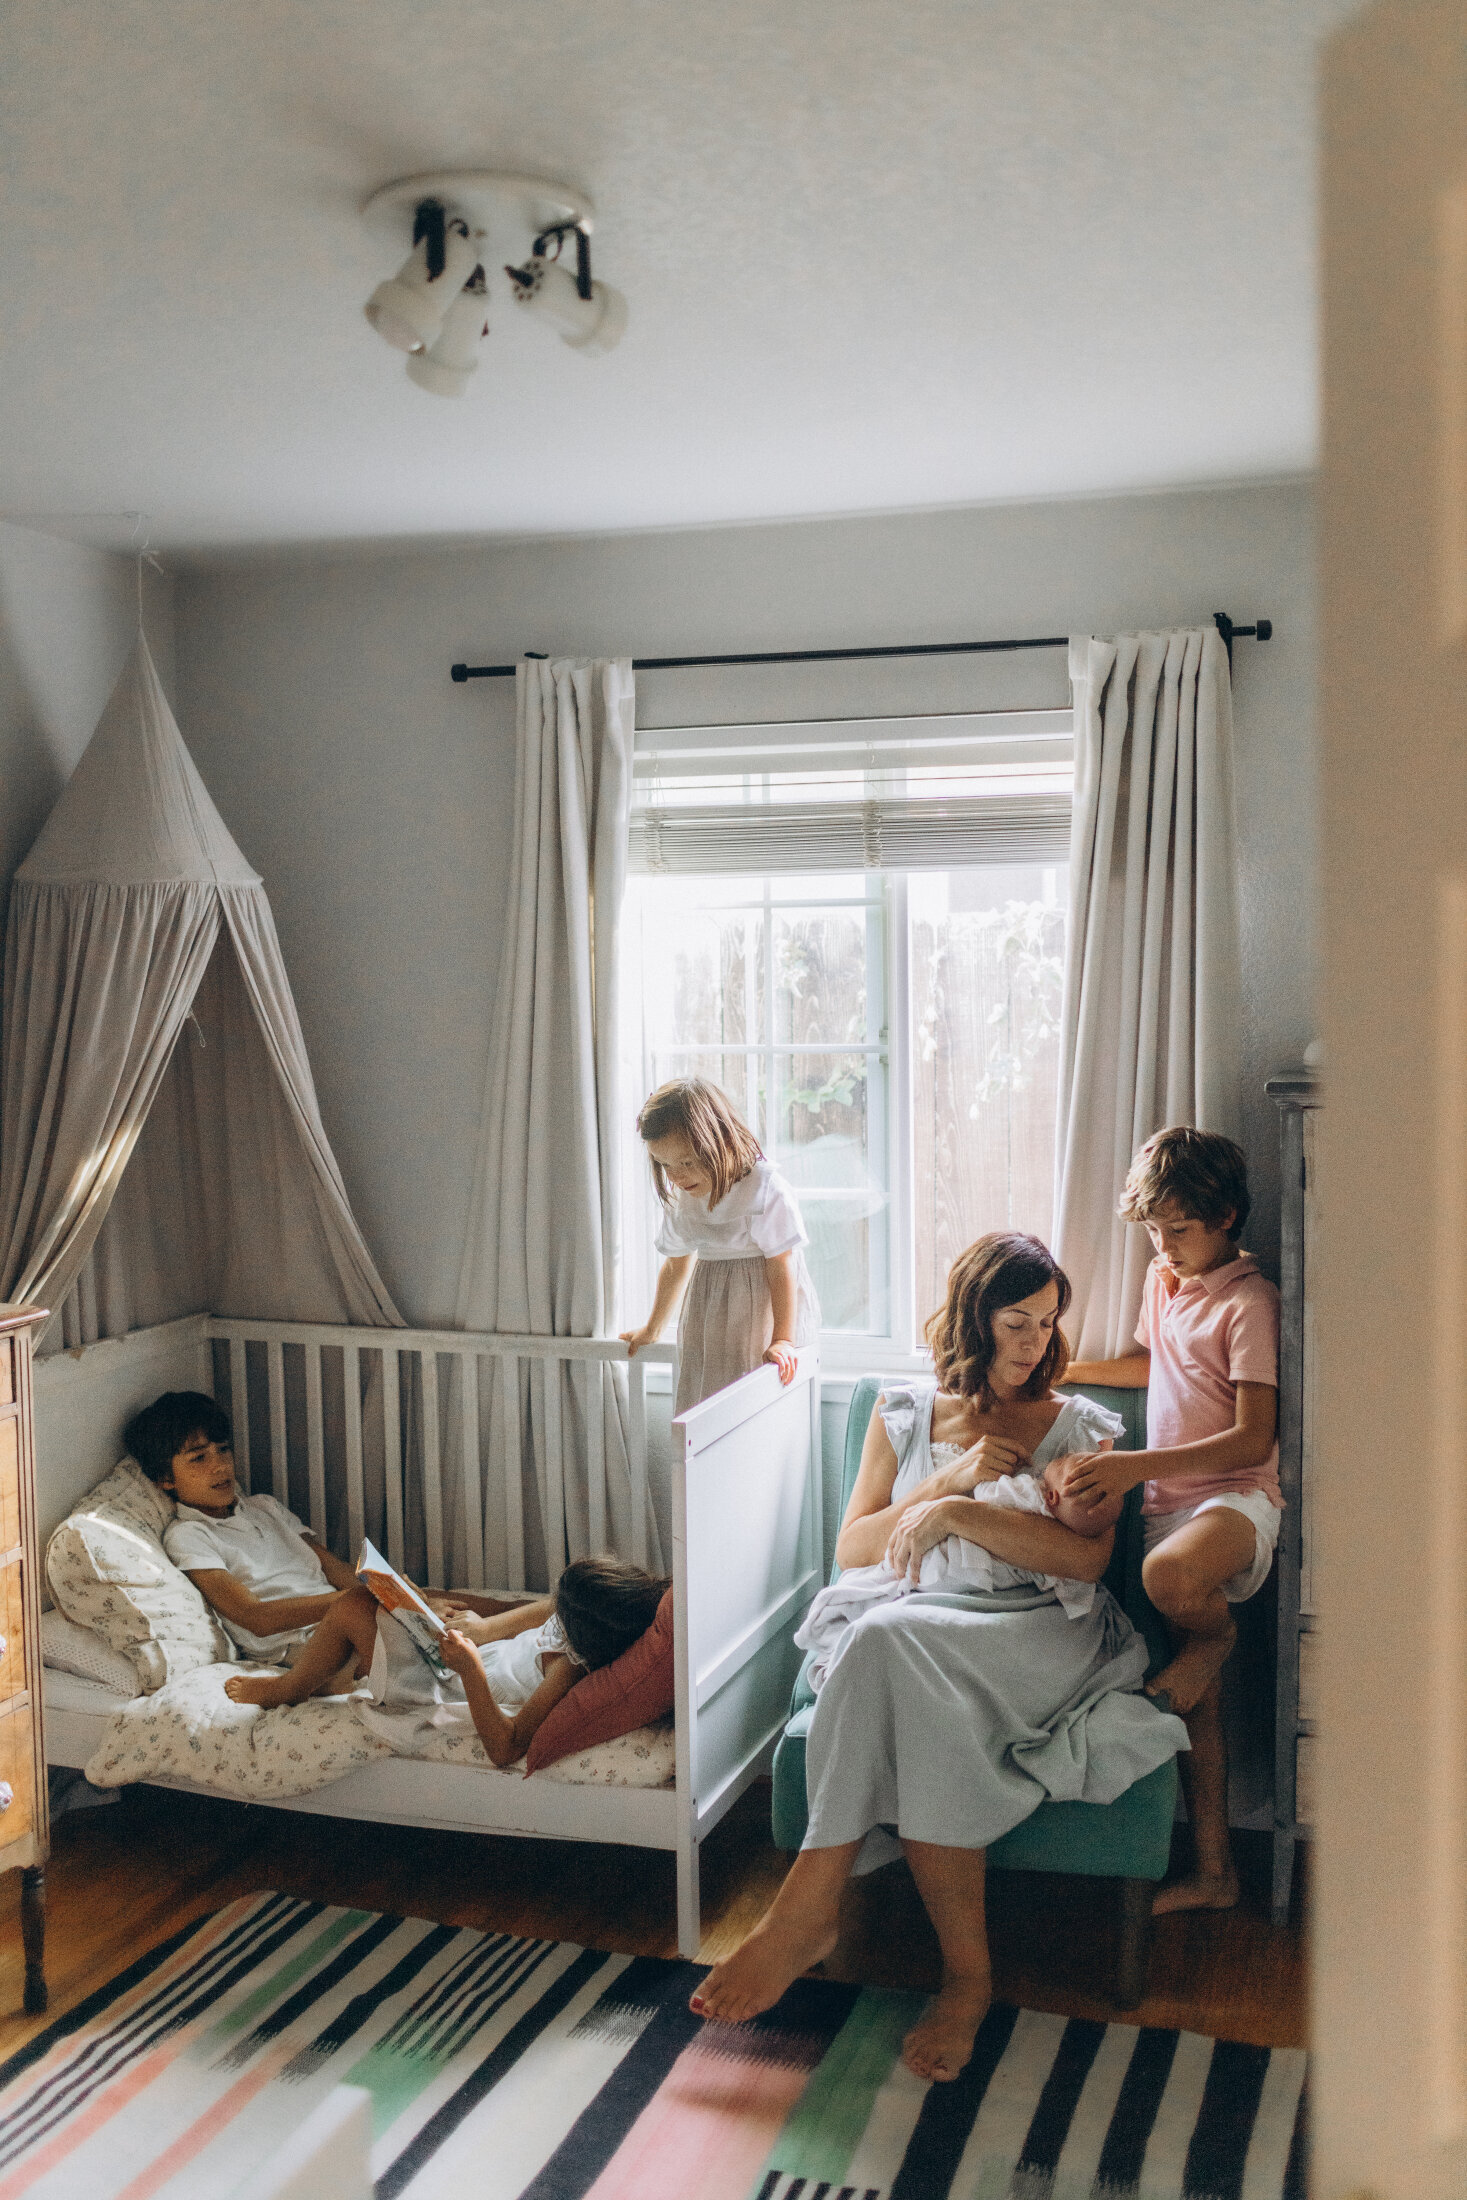 A cozy children's bedroom with one child in each of two bunk beds and a woman reading to two children sitting beside her. the room has curtains, a striped rug, and soft lighting.